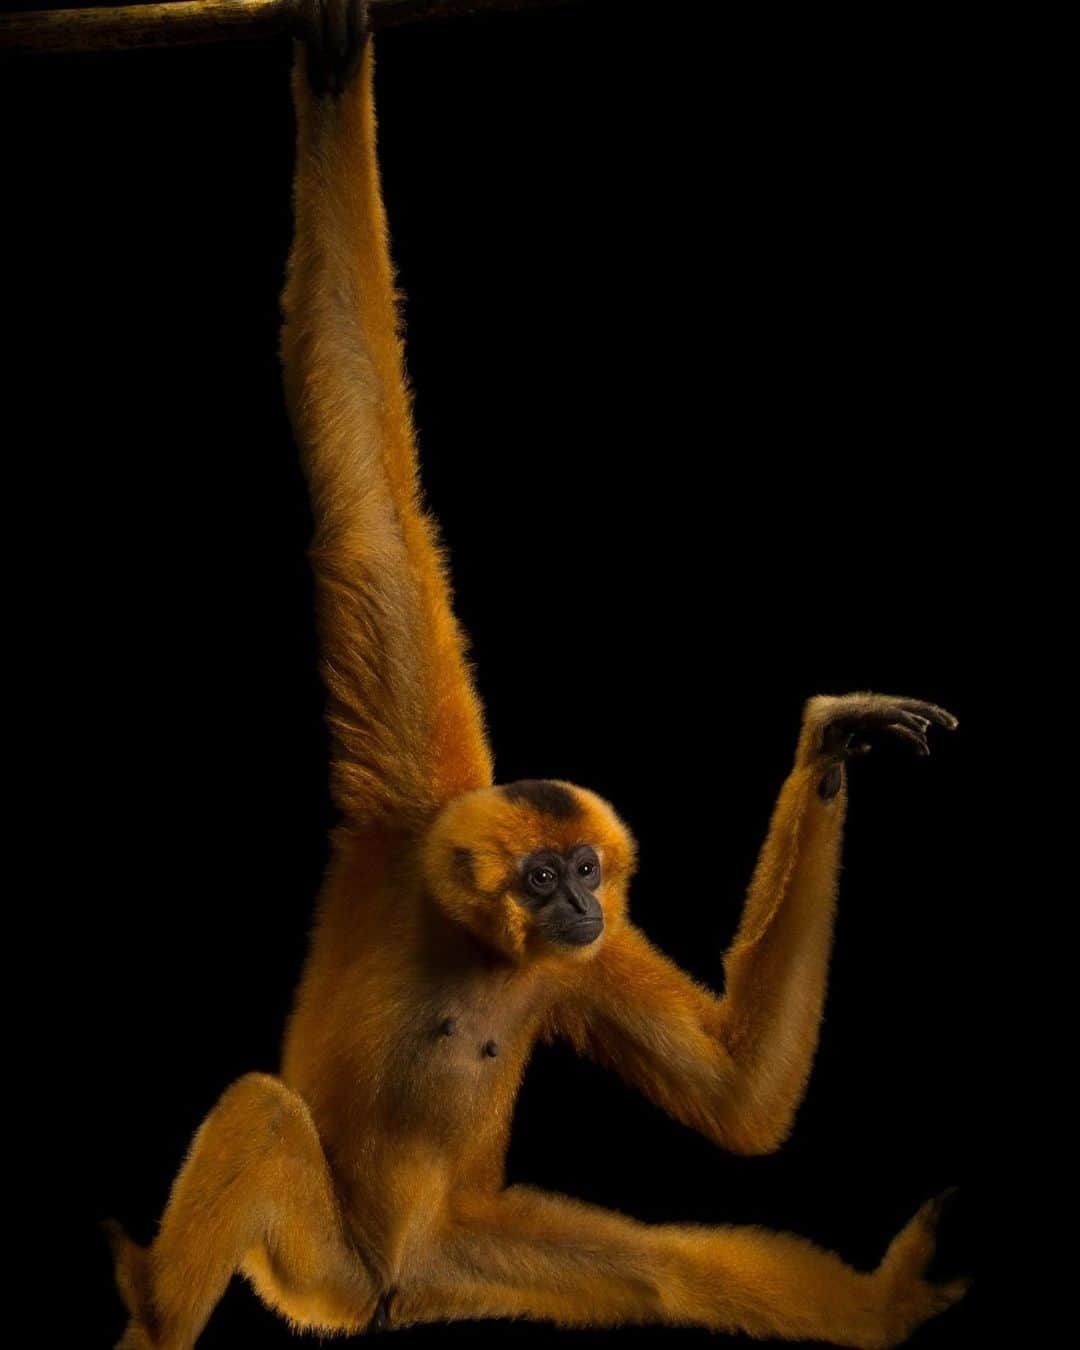 Joel Sartoreのインスタグラム：「Meet Pumuckel, an endangered yellow-cheeked gibbon @eprc.vietnam . This species exhibits sexual dimporphism - meaning that males and females look different from one another. While all yellow-cheeked gibbons are born blonde so that they blend with their mother’s fur, both sexes eventually turn black. While males will remain black, females like Pumuckel turn back to blonde when they reach sexual maturity, with only a black cap remaining on the top of their heads.   #primate #gibbon #mammal #animal #wildlife #photography #animalphotography #wildlifephotography #studioportrait #PhotoArk #InternationalGibbonDay @insidenatgeo」